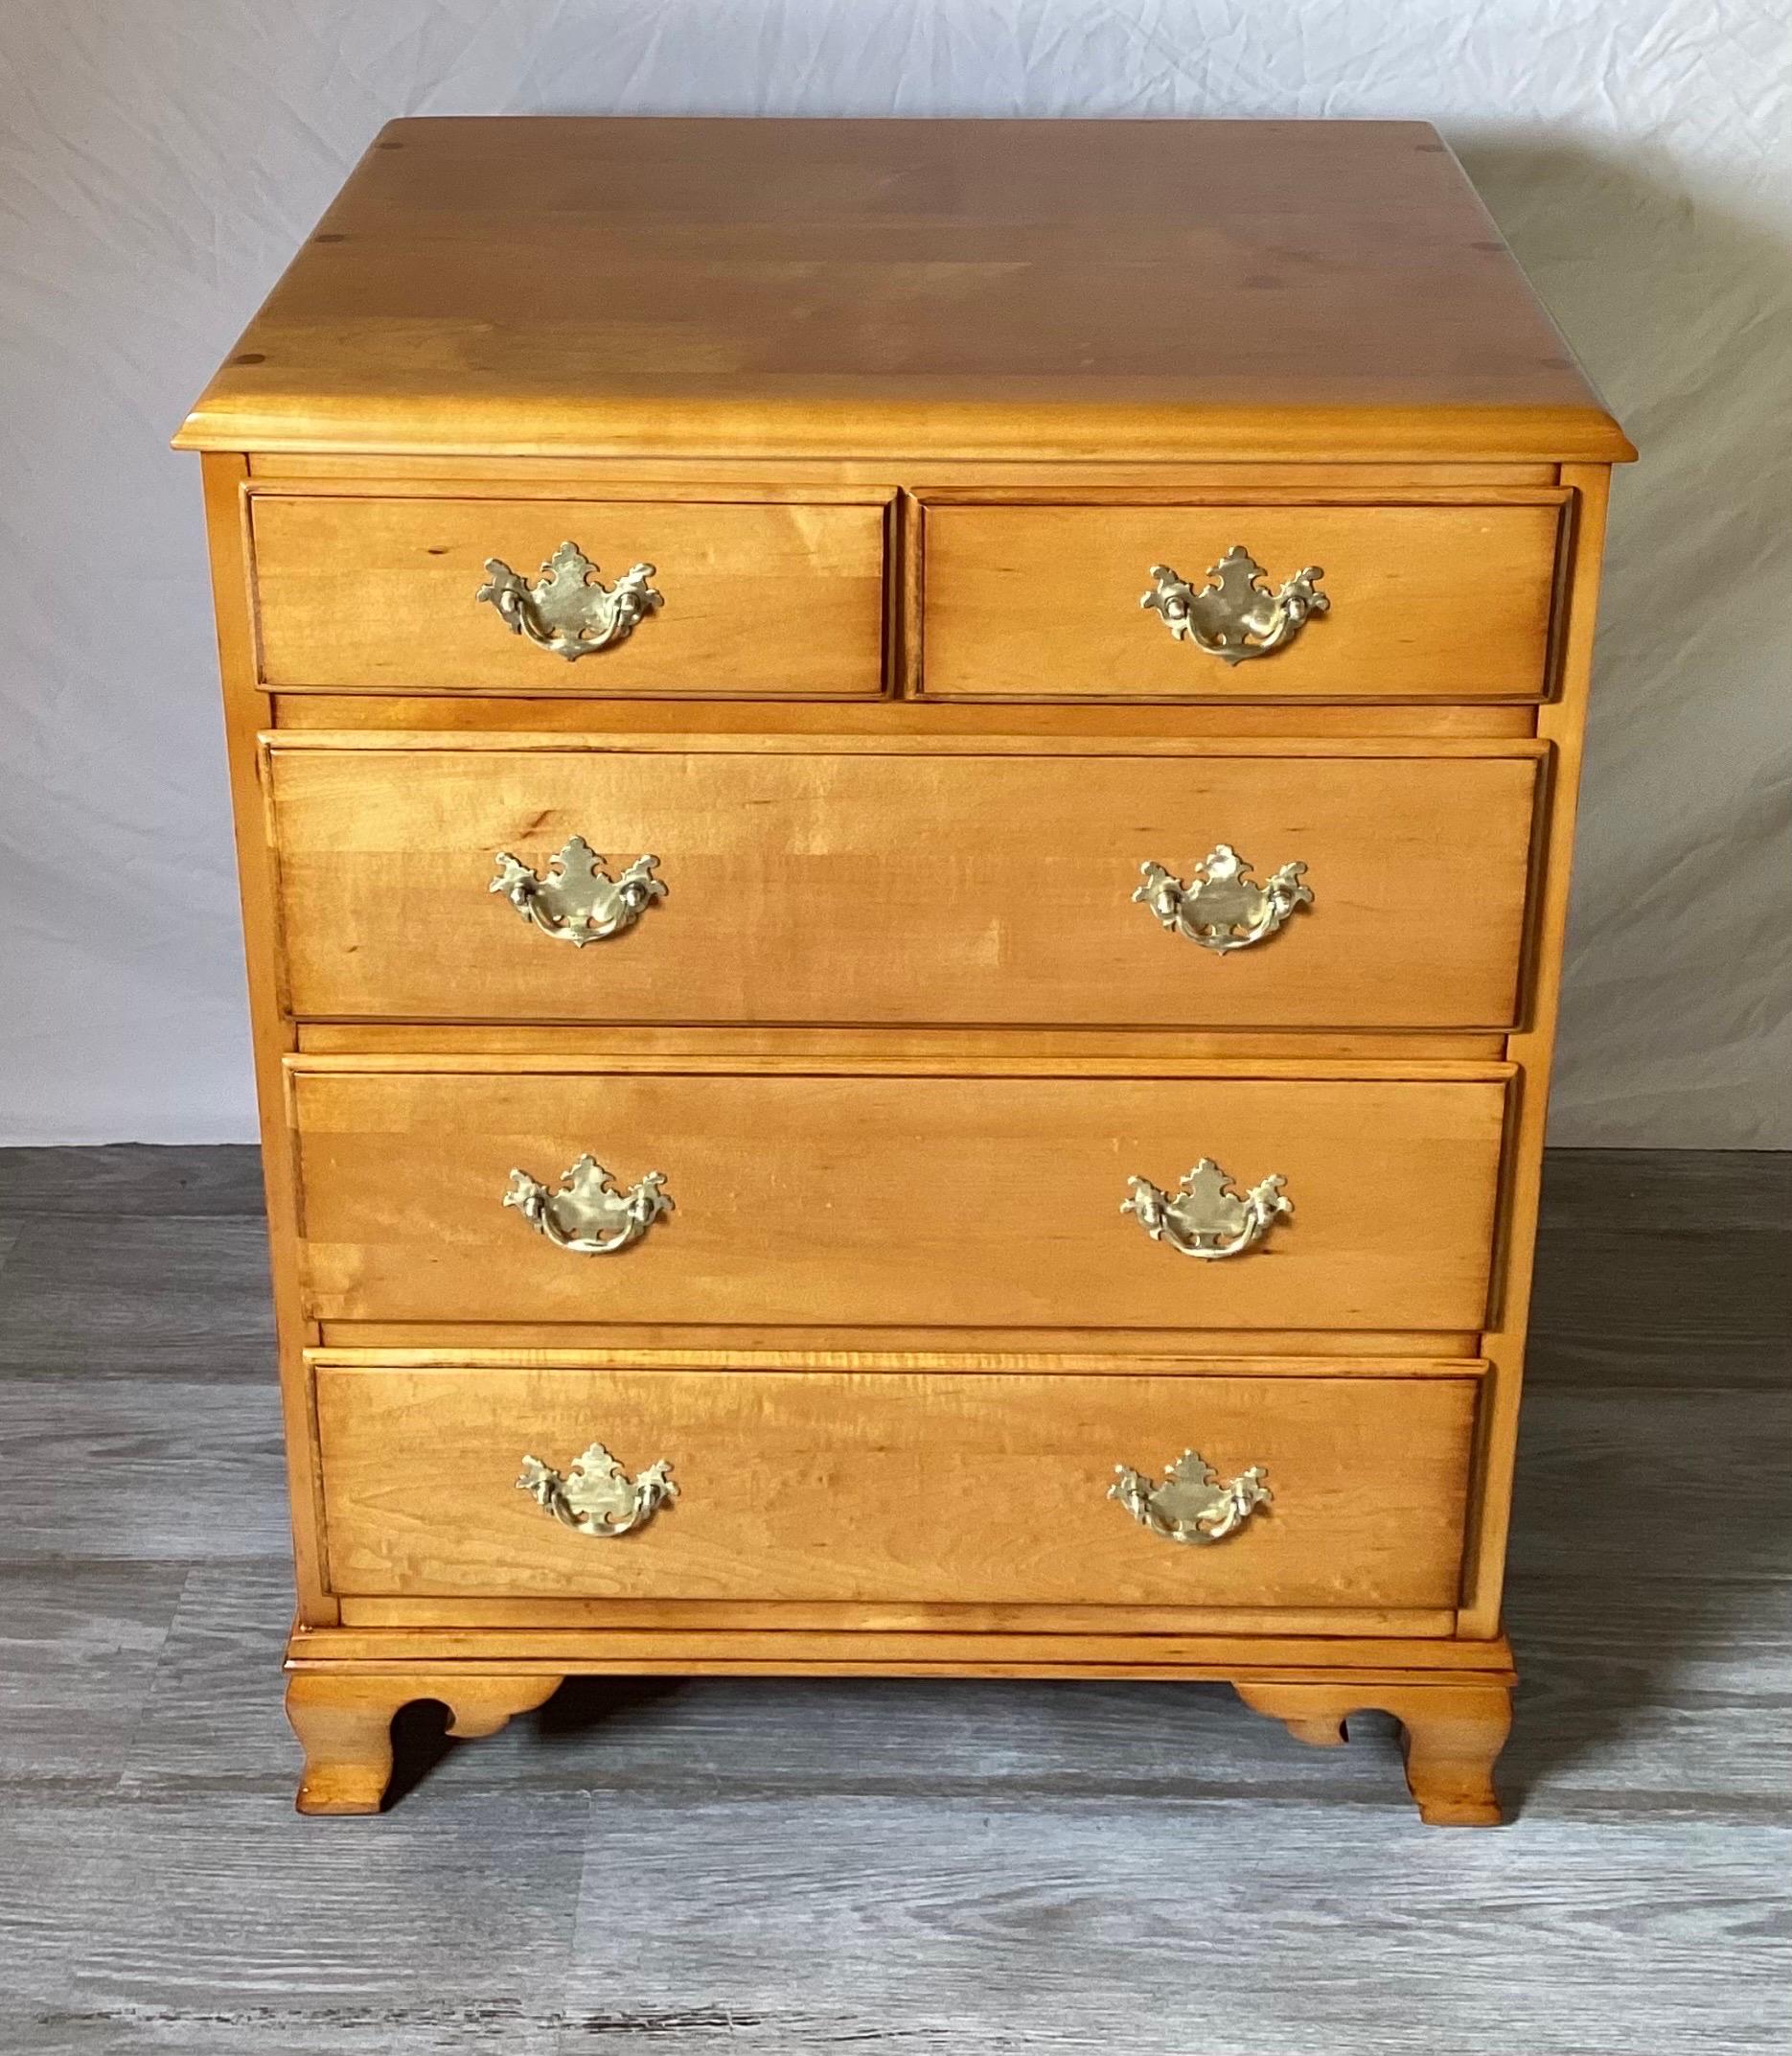 Beautiful solid Vermont maple chest of drawers.  The chest with classic Aladdin's lamp brass hardware in a warm buttery maple wood. Two smaller drawers over three larger drawers with the chest resting on bracket feet.  The finish has been